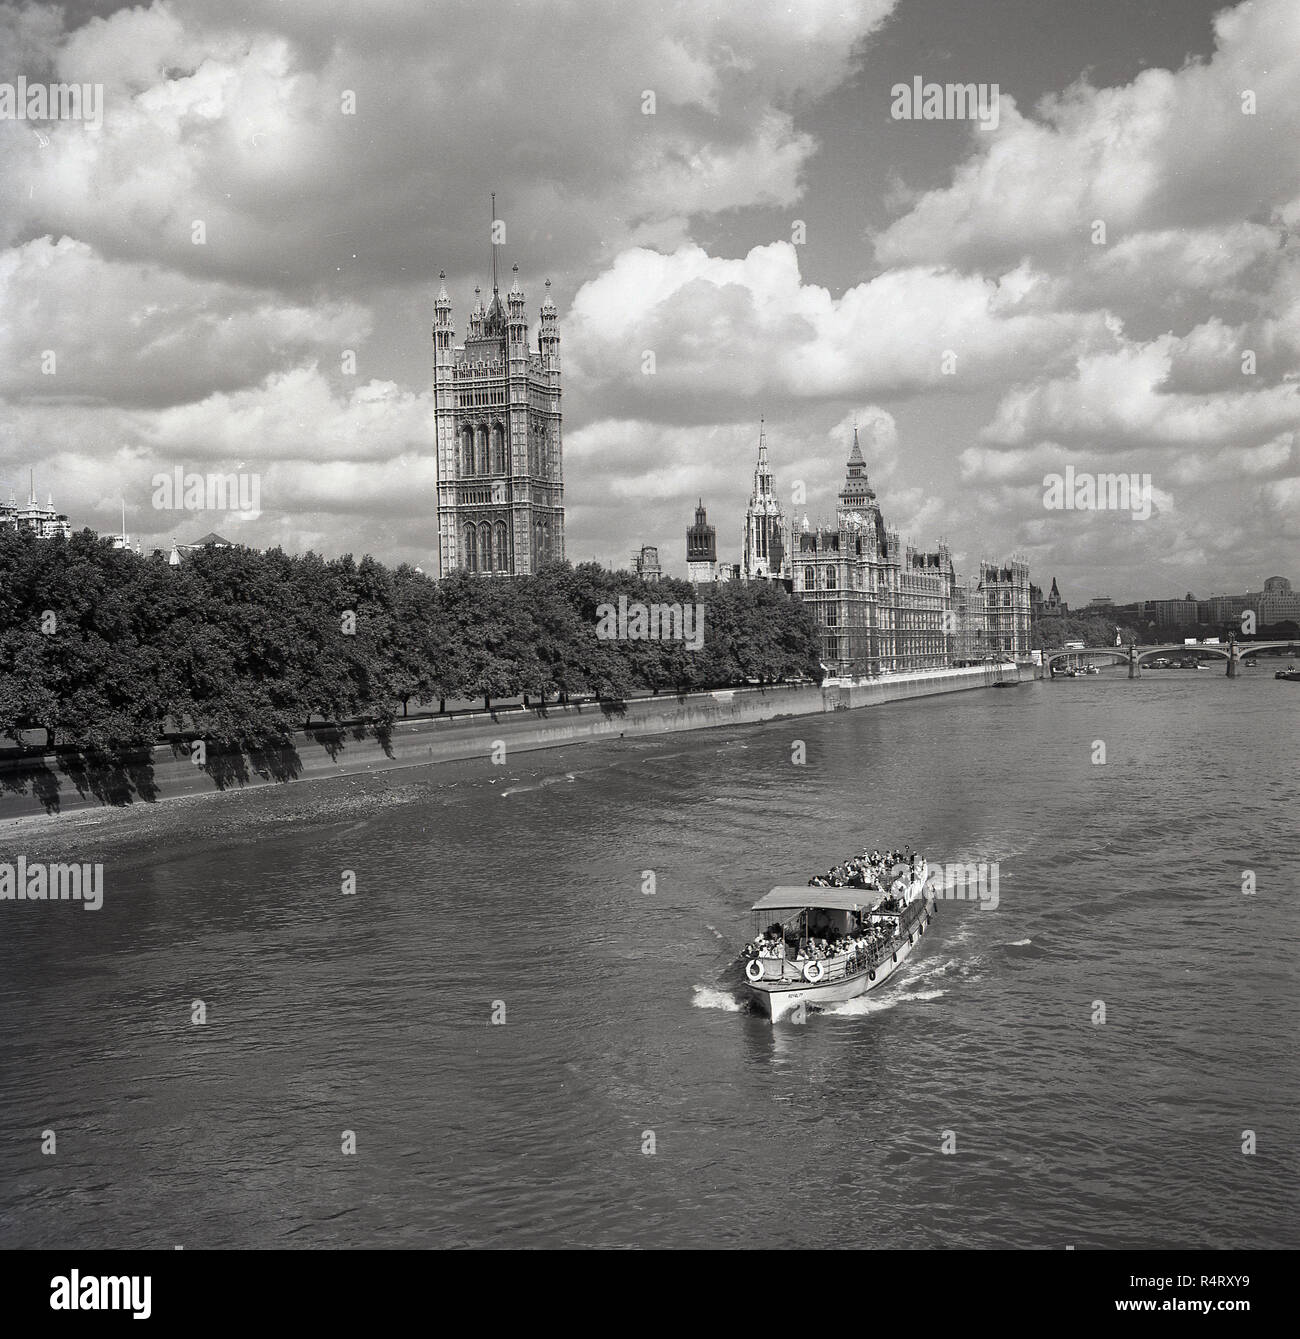 1960s, historical, summertime and a pleasure boat going down the river Thames having just past the Houses of Parliament, the buildings of the government of the UK, London, England, UK. Stock Photo